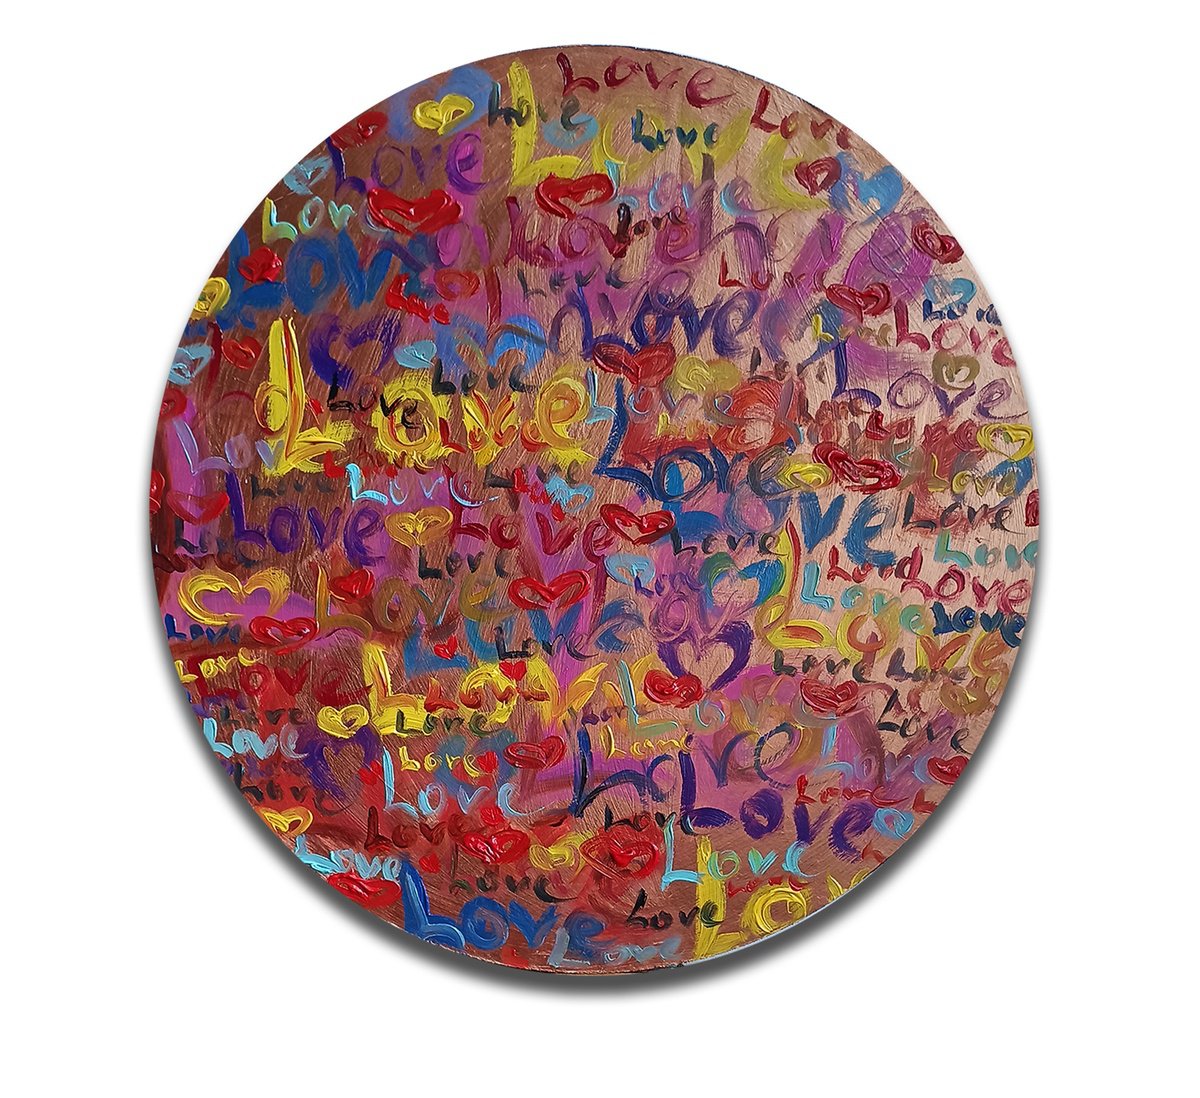 Declaration of love - love, for lovers, gift for lovers, text, word, oil painting, round f... by Anastasia Kozorez